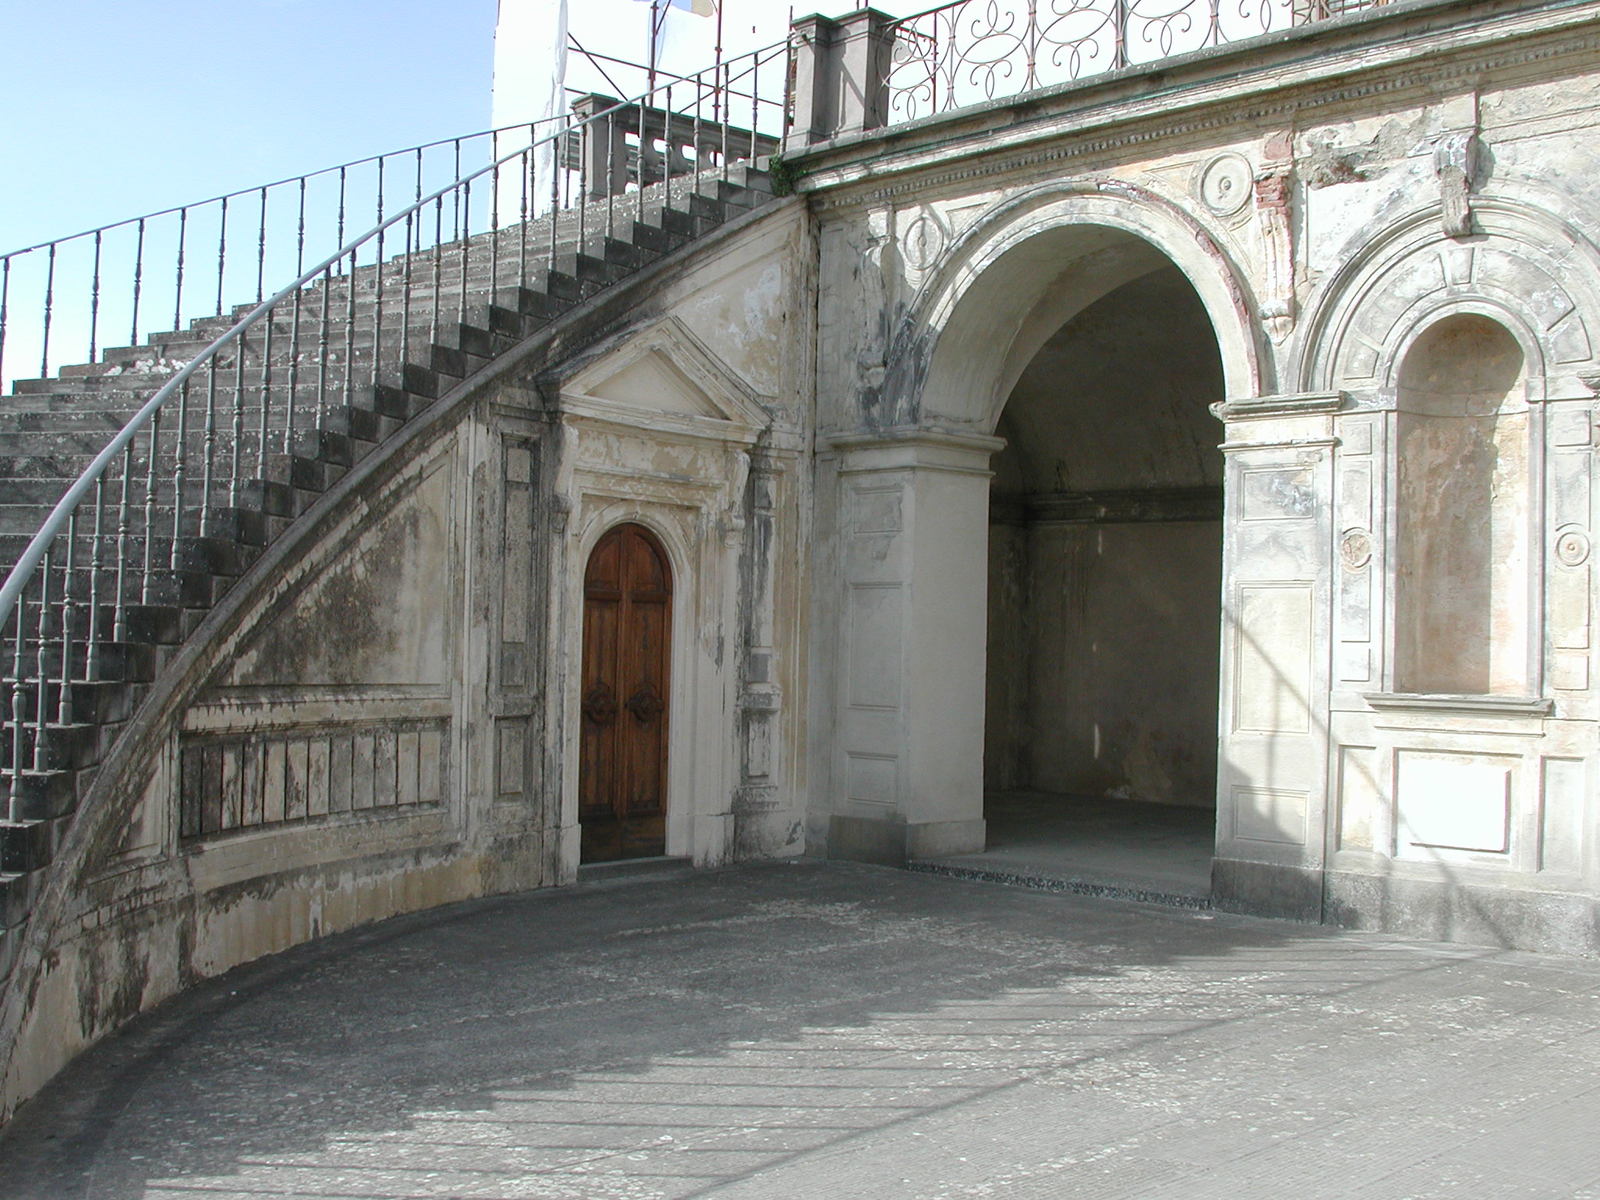 a stone entrance with steps and gated area